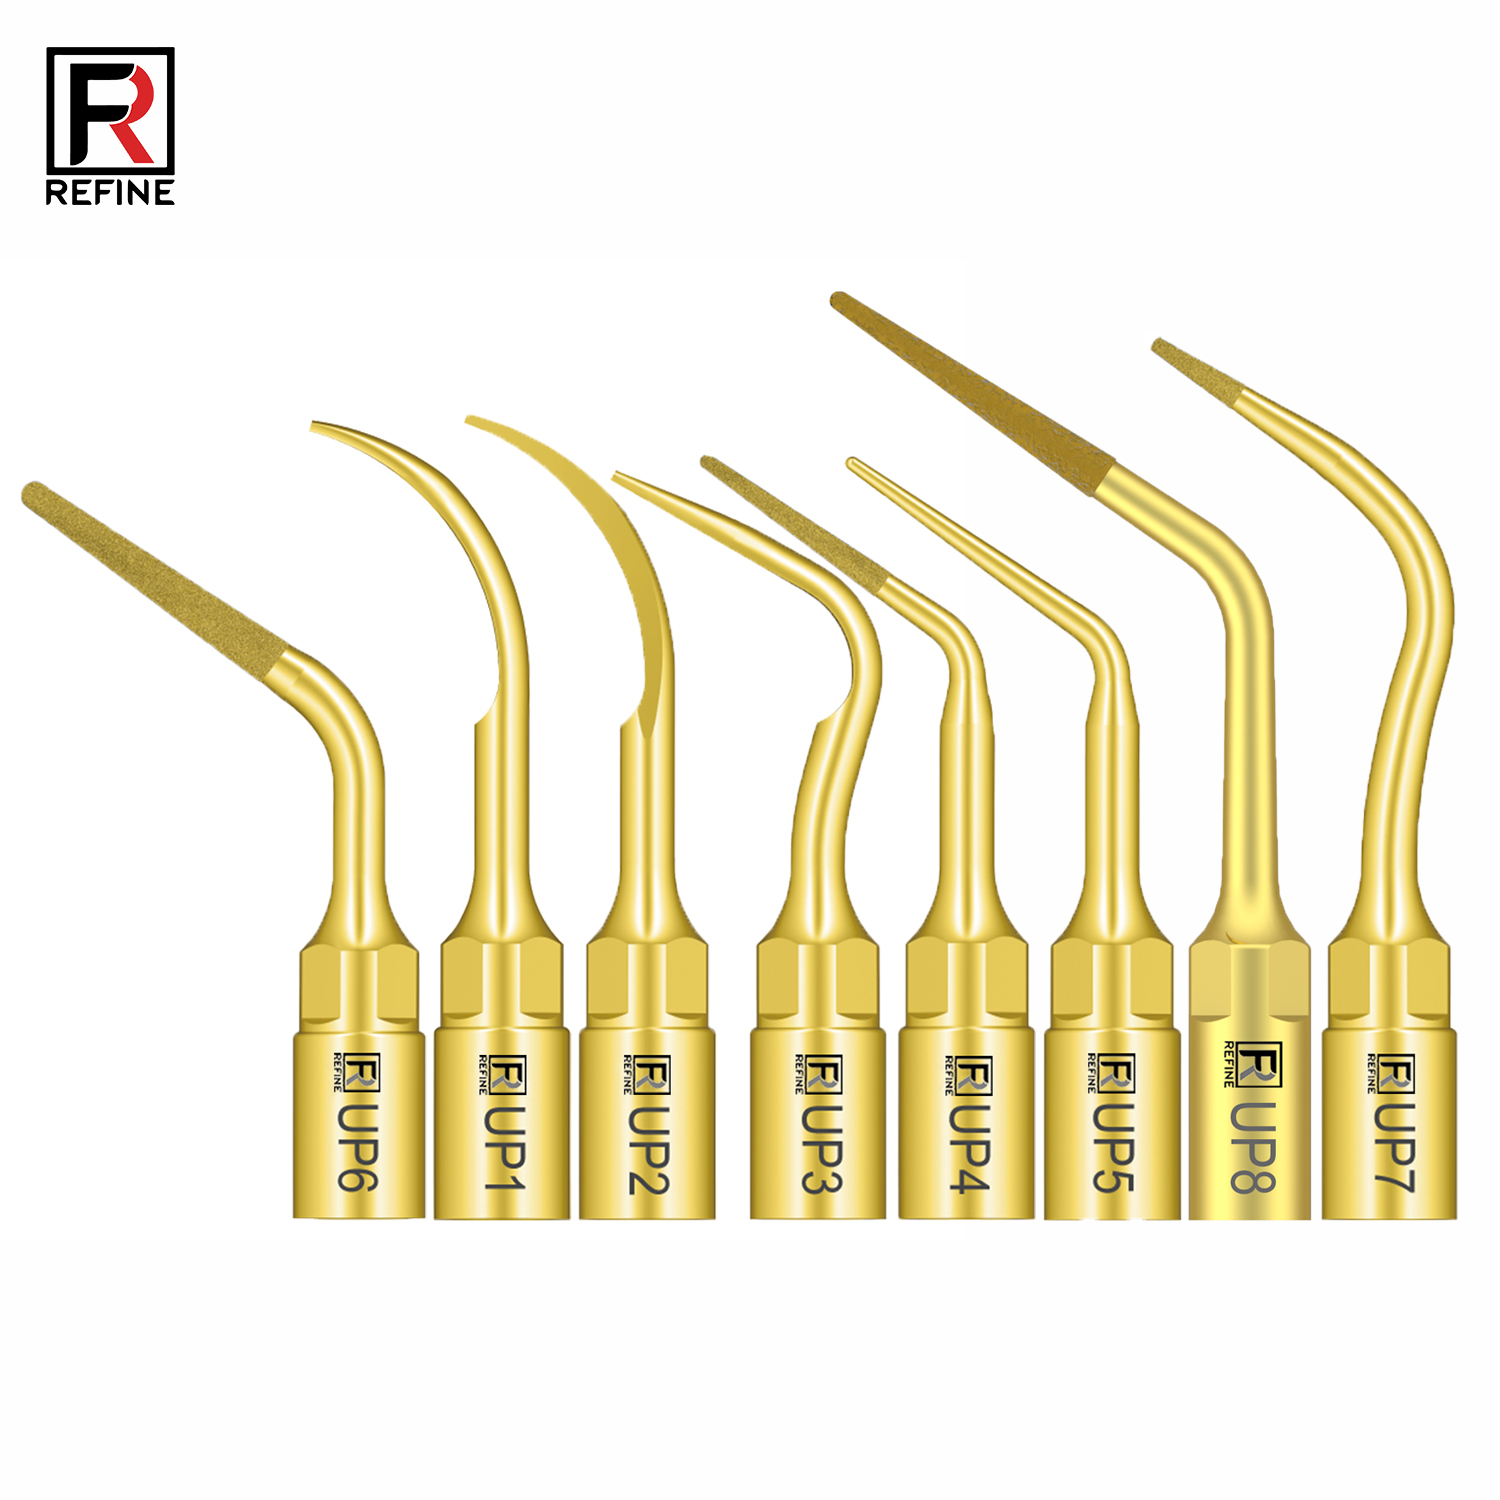 1Pz Inserti parodontologia e endodonzia UP1 UP2 UP3 UP4 UP5 UP6 UP7/8 compatible con Mectron, Silfradent, Dmetec e Woodpecker